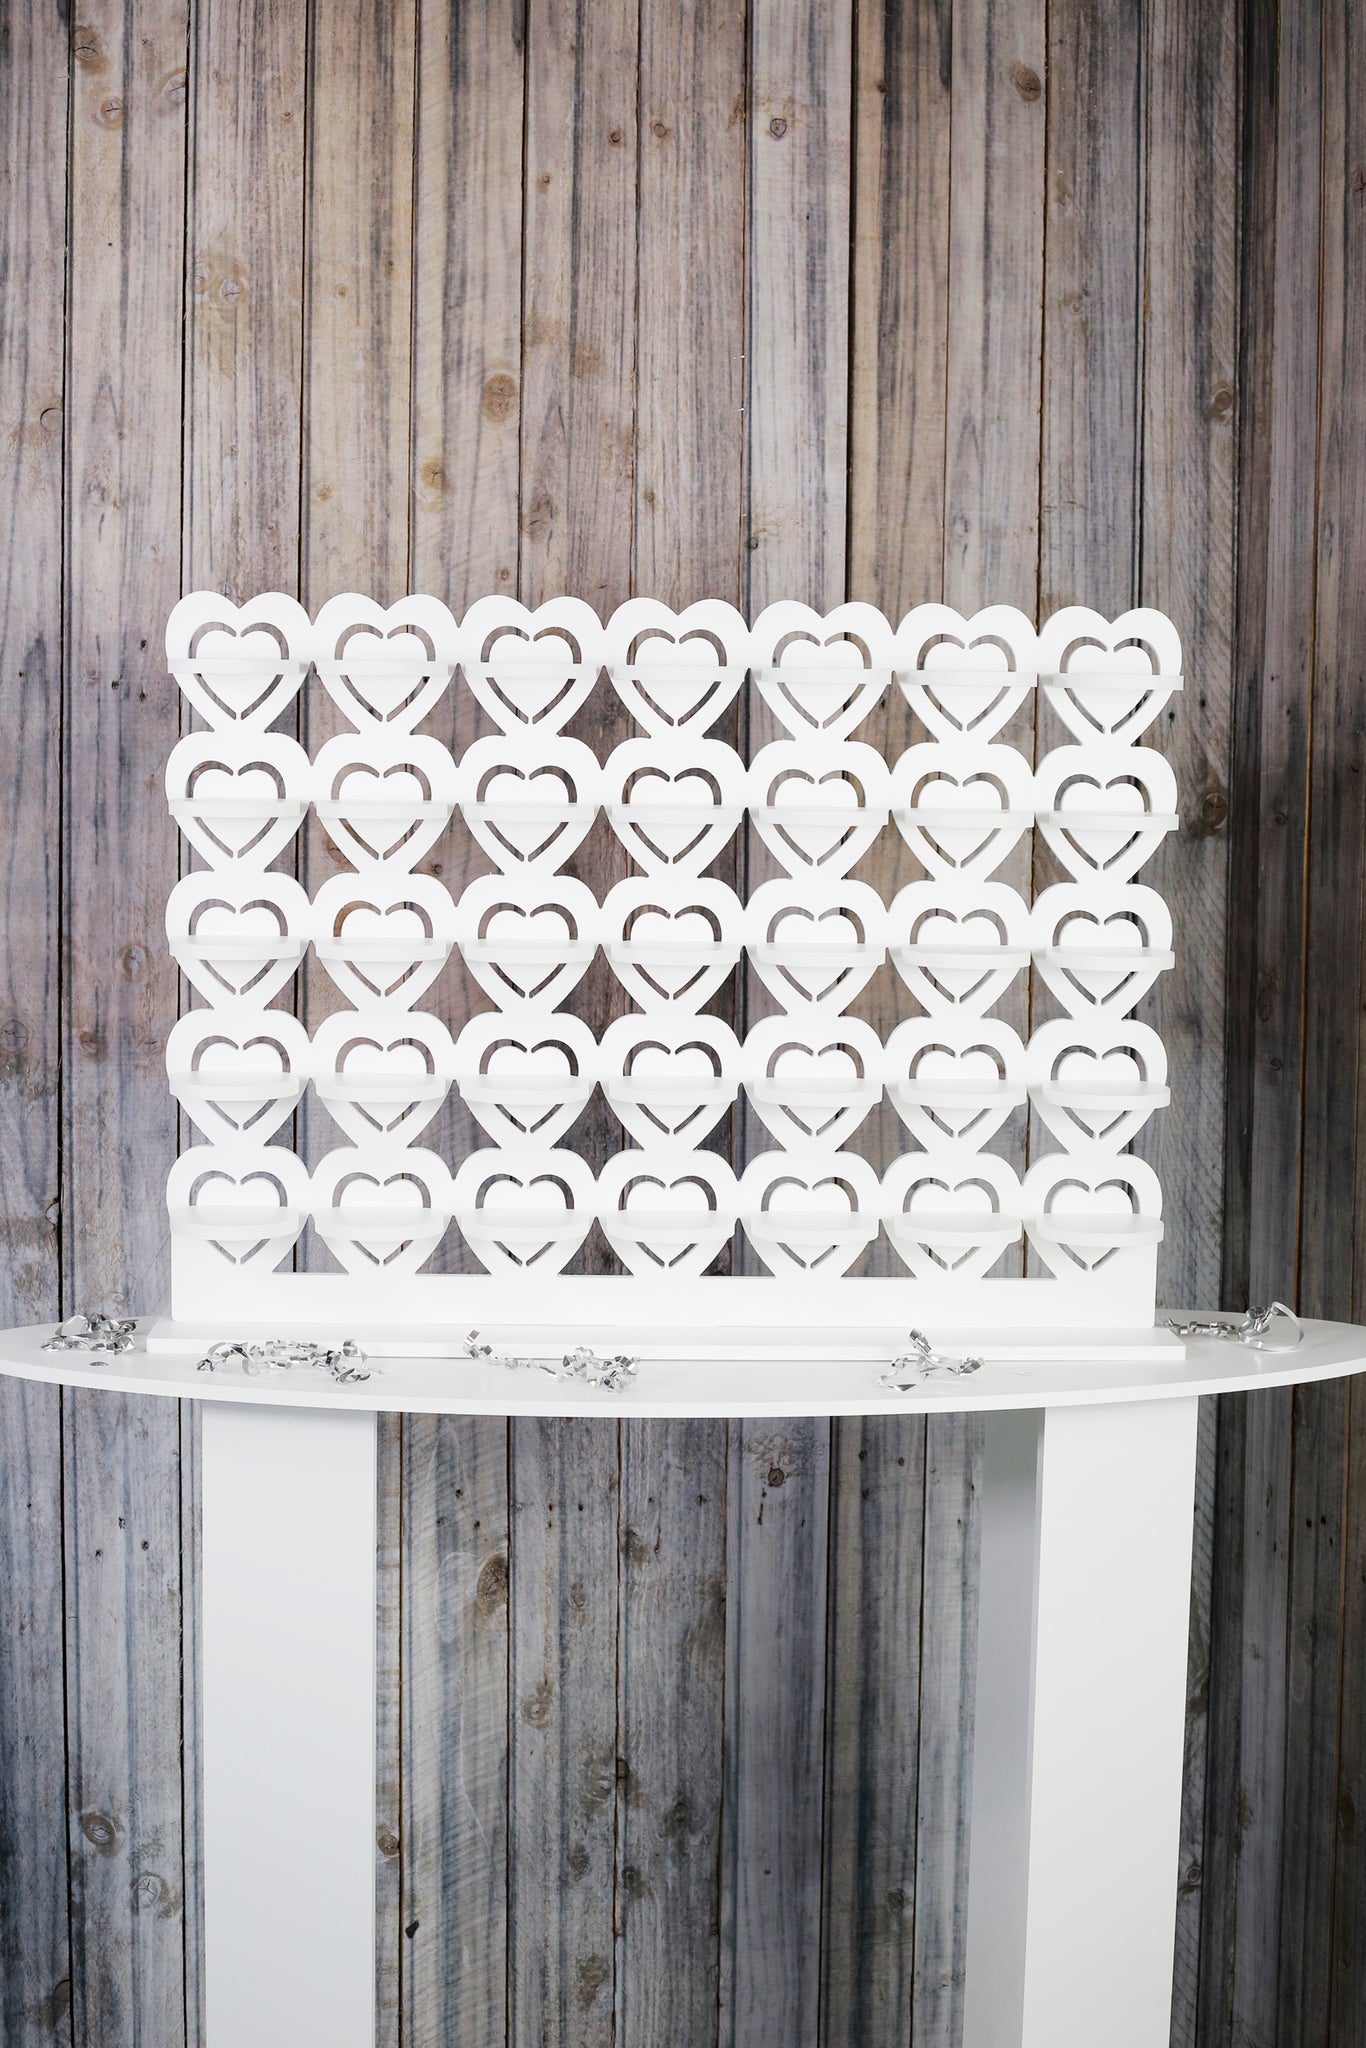 Cupcake Wall Cup Cake Wall Cupcake Stand Made from white